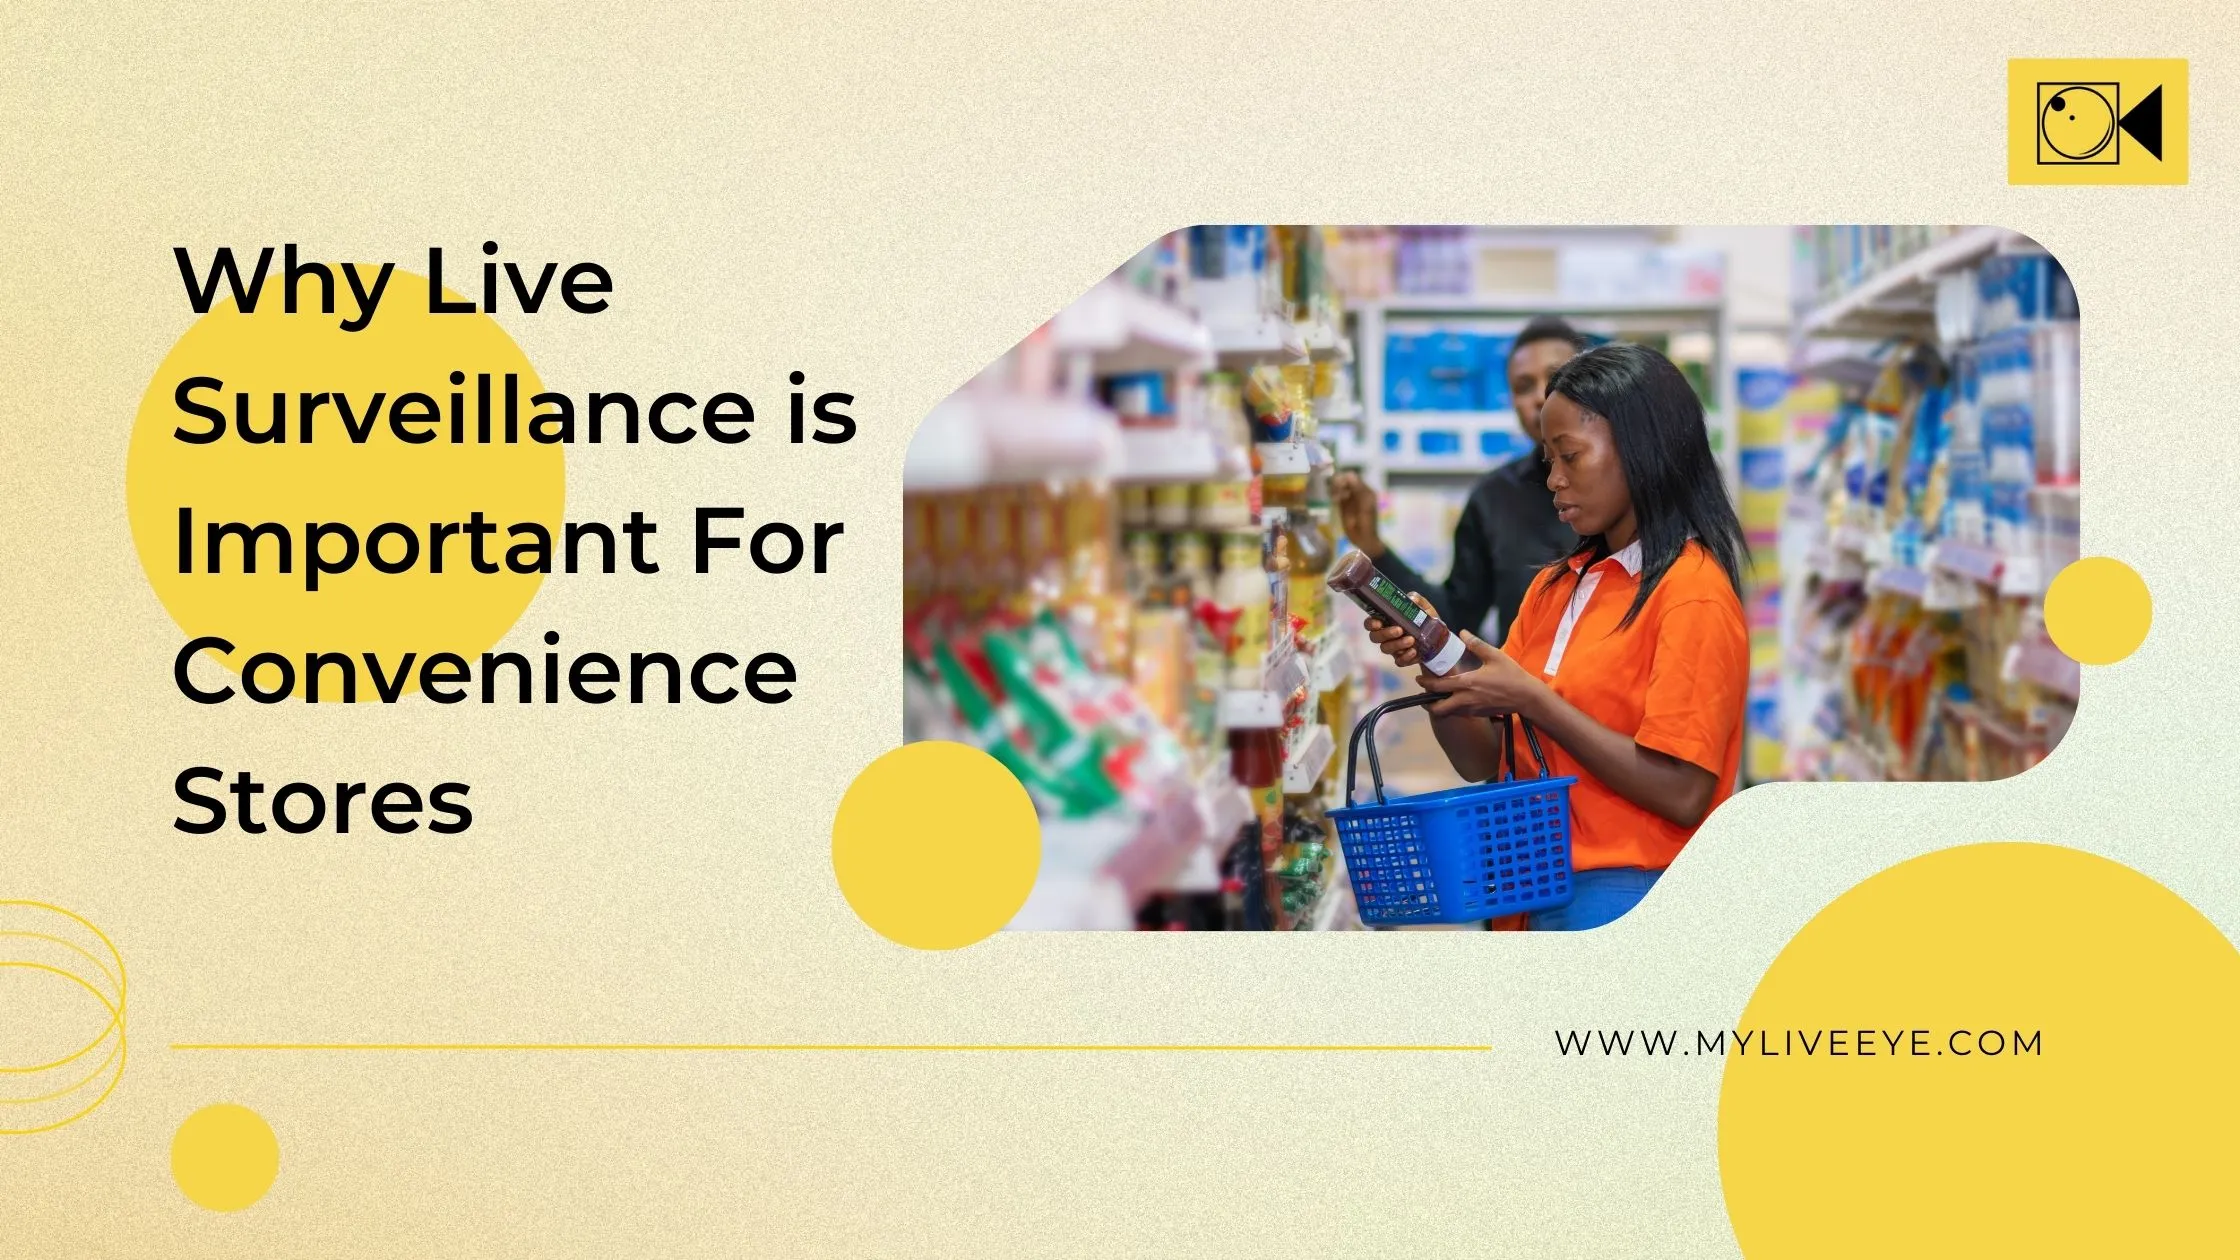 Why Live Surveillance is Important For Convenience Stores